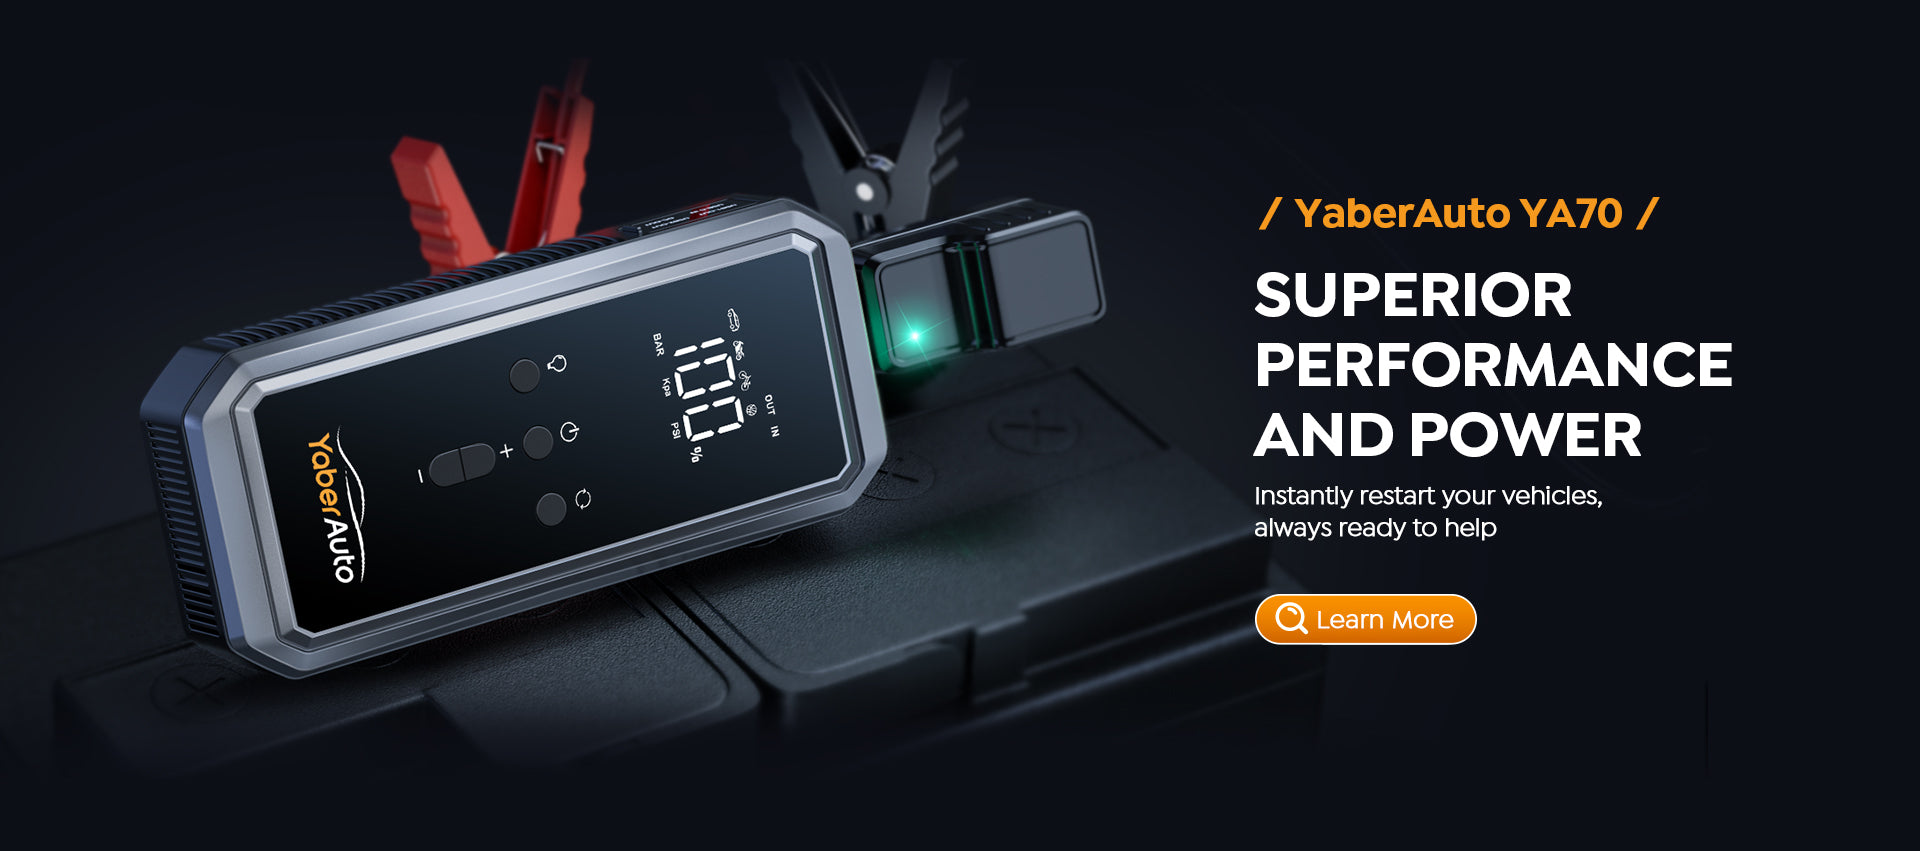 Compare prices for YaberAuto across all European  stores